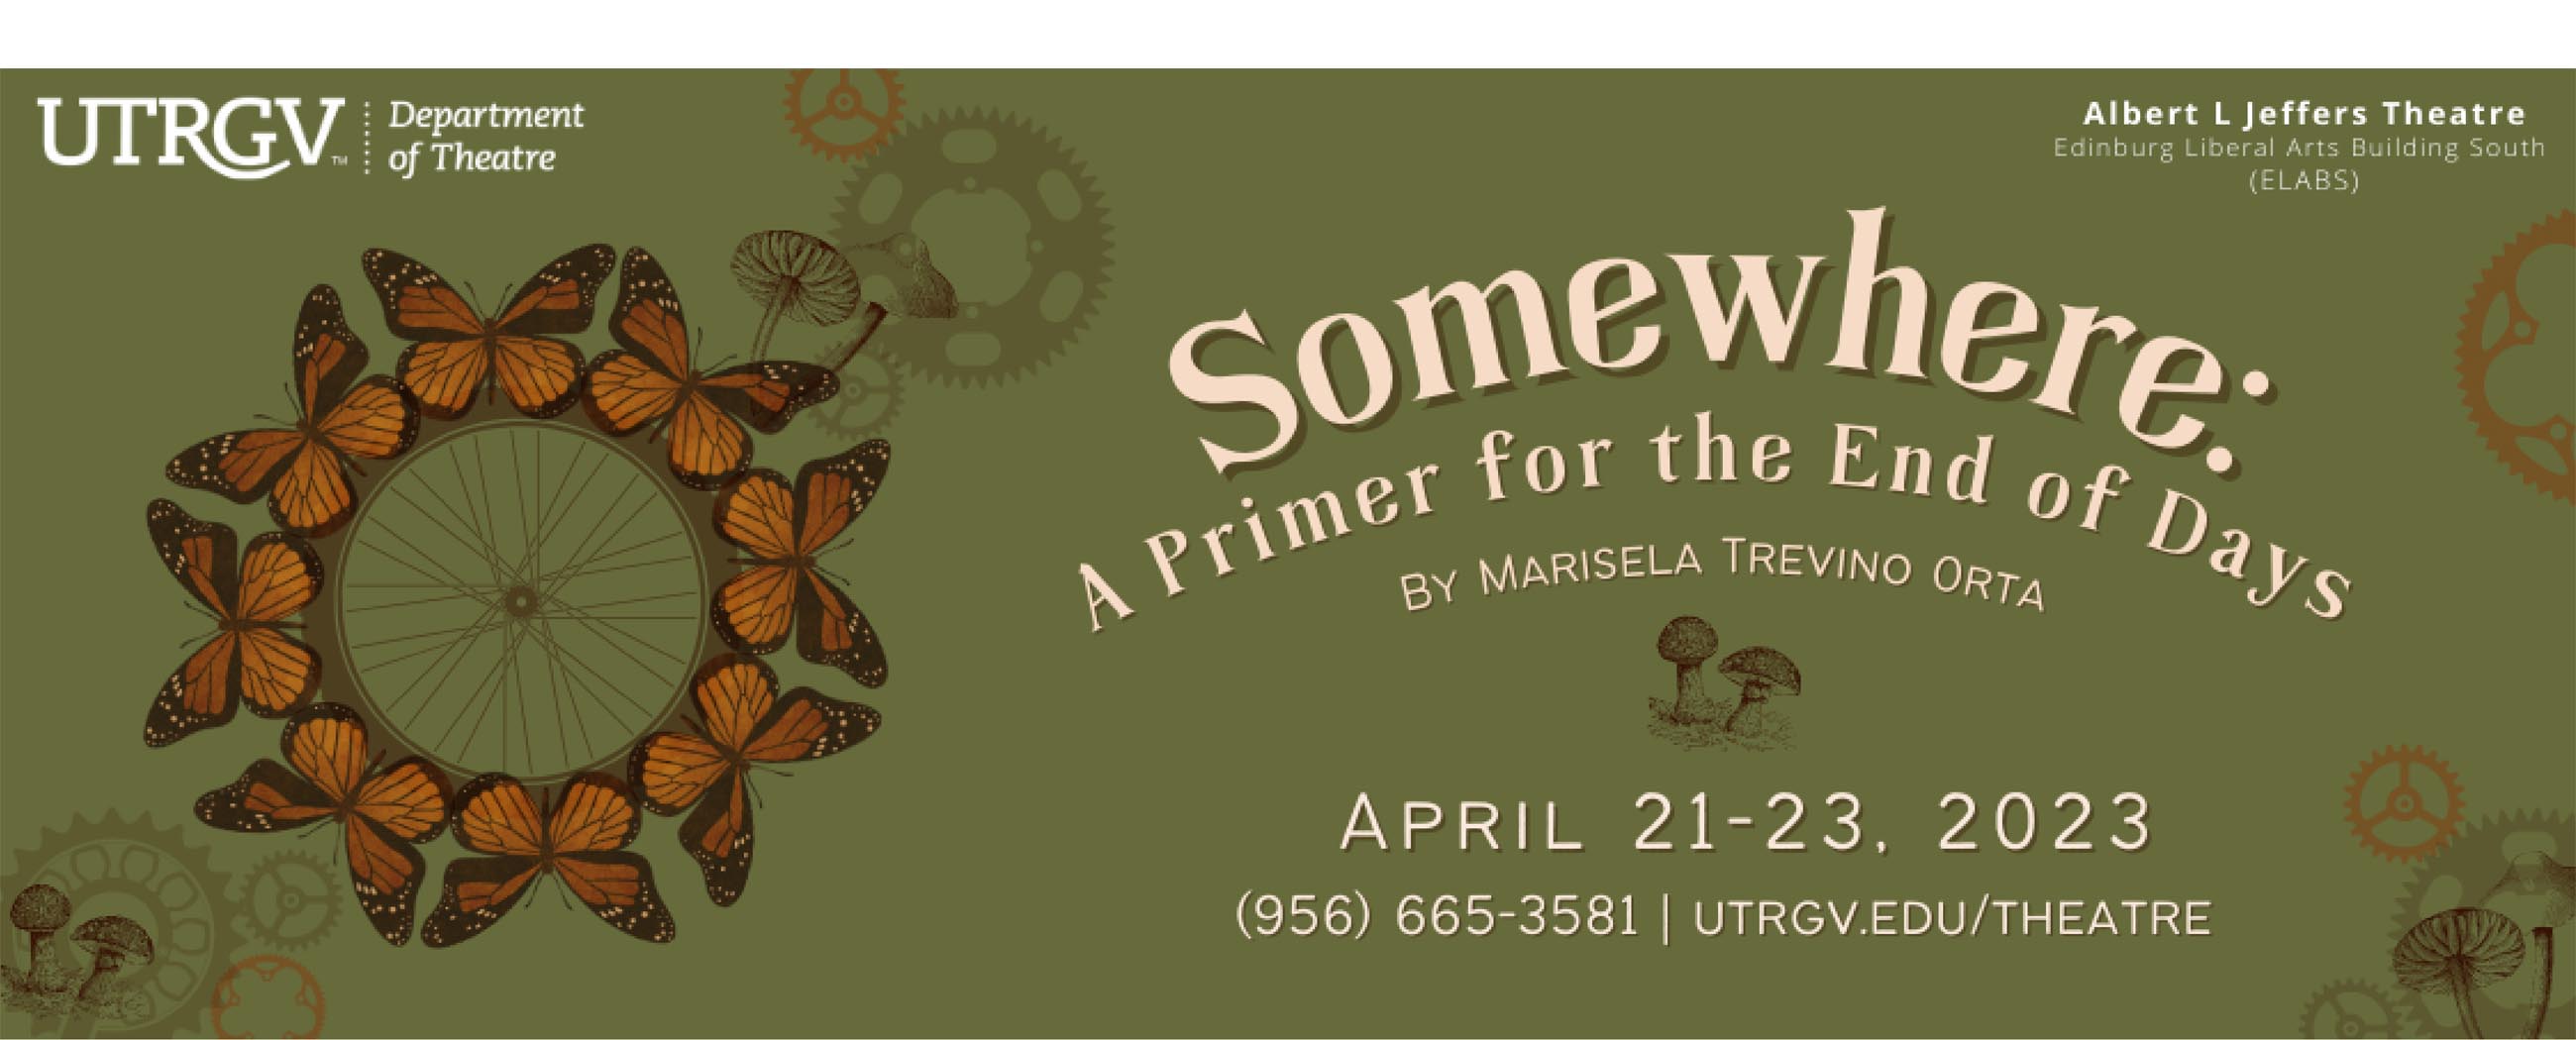 UTRGV Department of Theatre presents, Somewhere: a primer for the end of days by Marisela Trevino Orta from April 21 - 23, 2023 Page Banner 